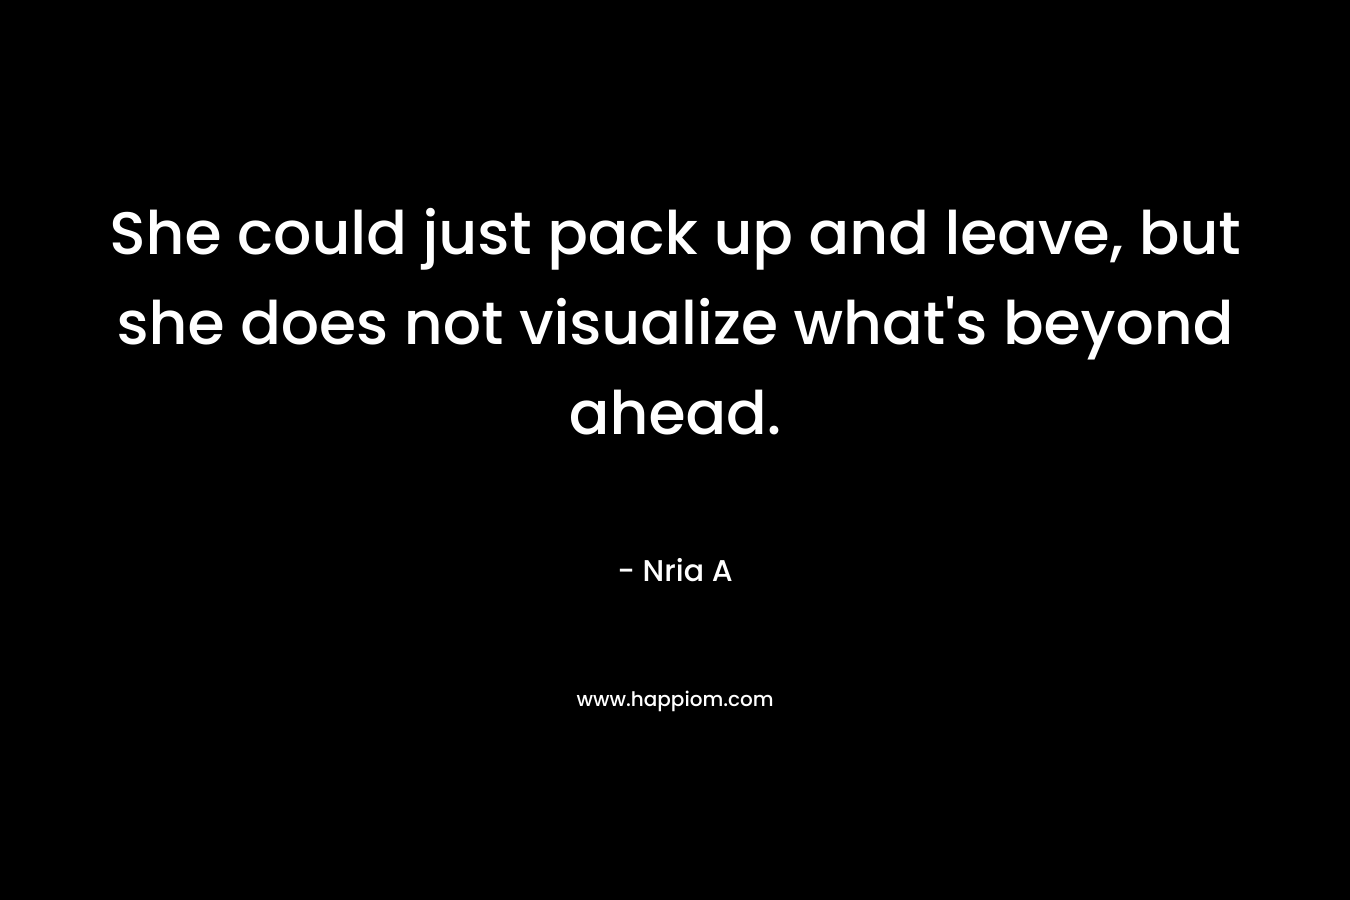 She could just pack up and leave, but she does not visualize what’s beyond ahead. – Nria A